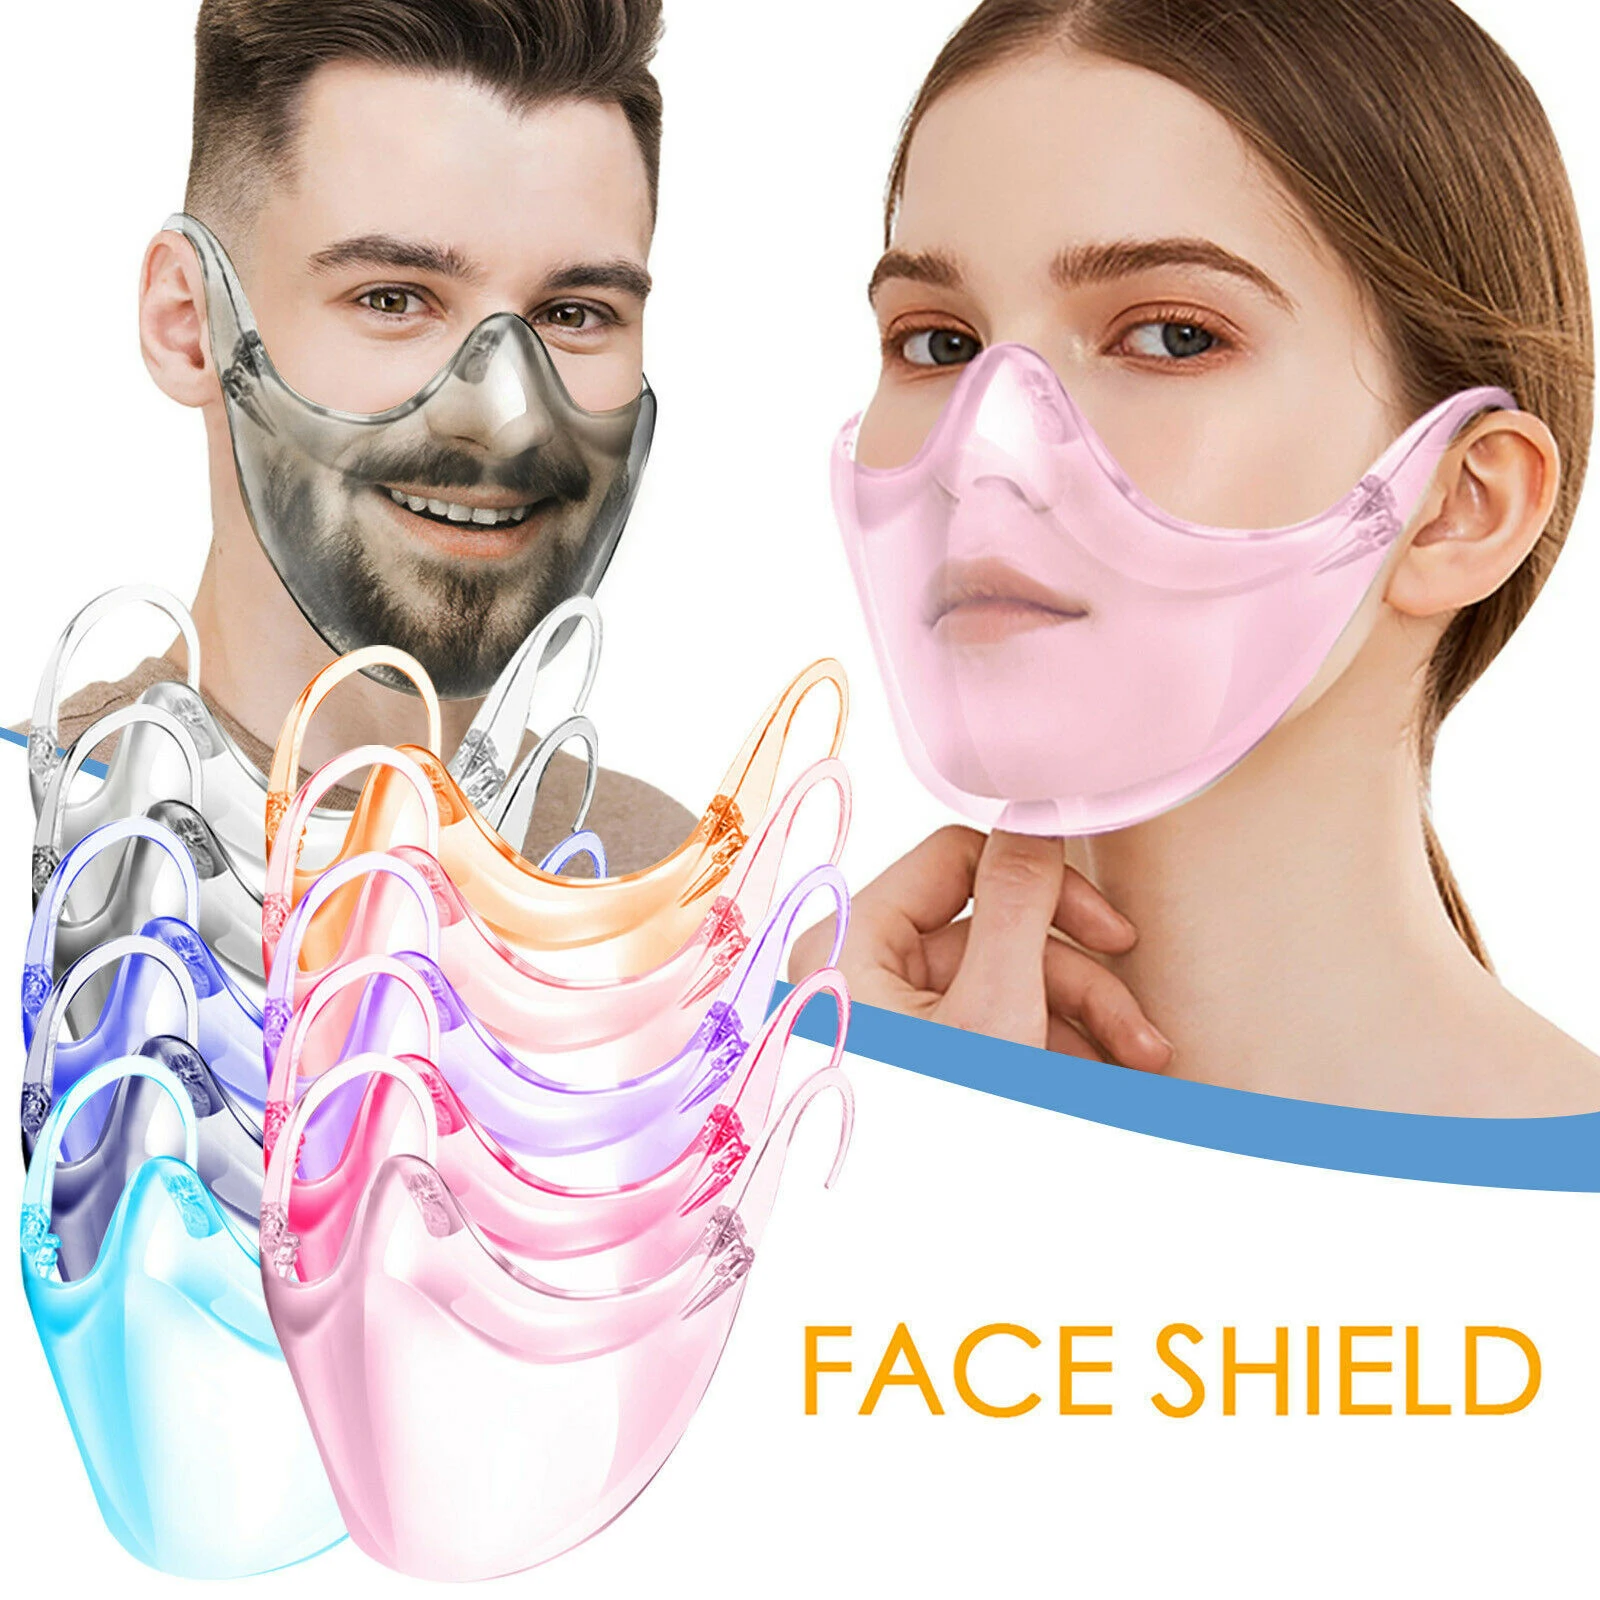 

Radical Alternative Shield Durable Protective Face Cover Mask Safety Anti-Fog Mask Safety Anti-Fog Combine Reusable MC889